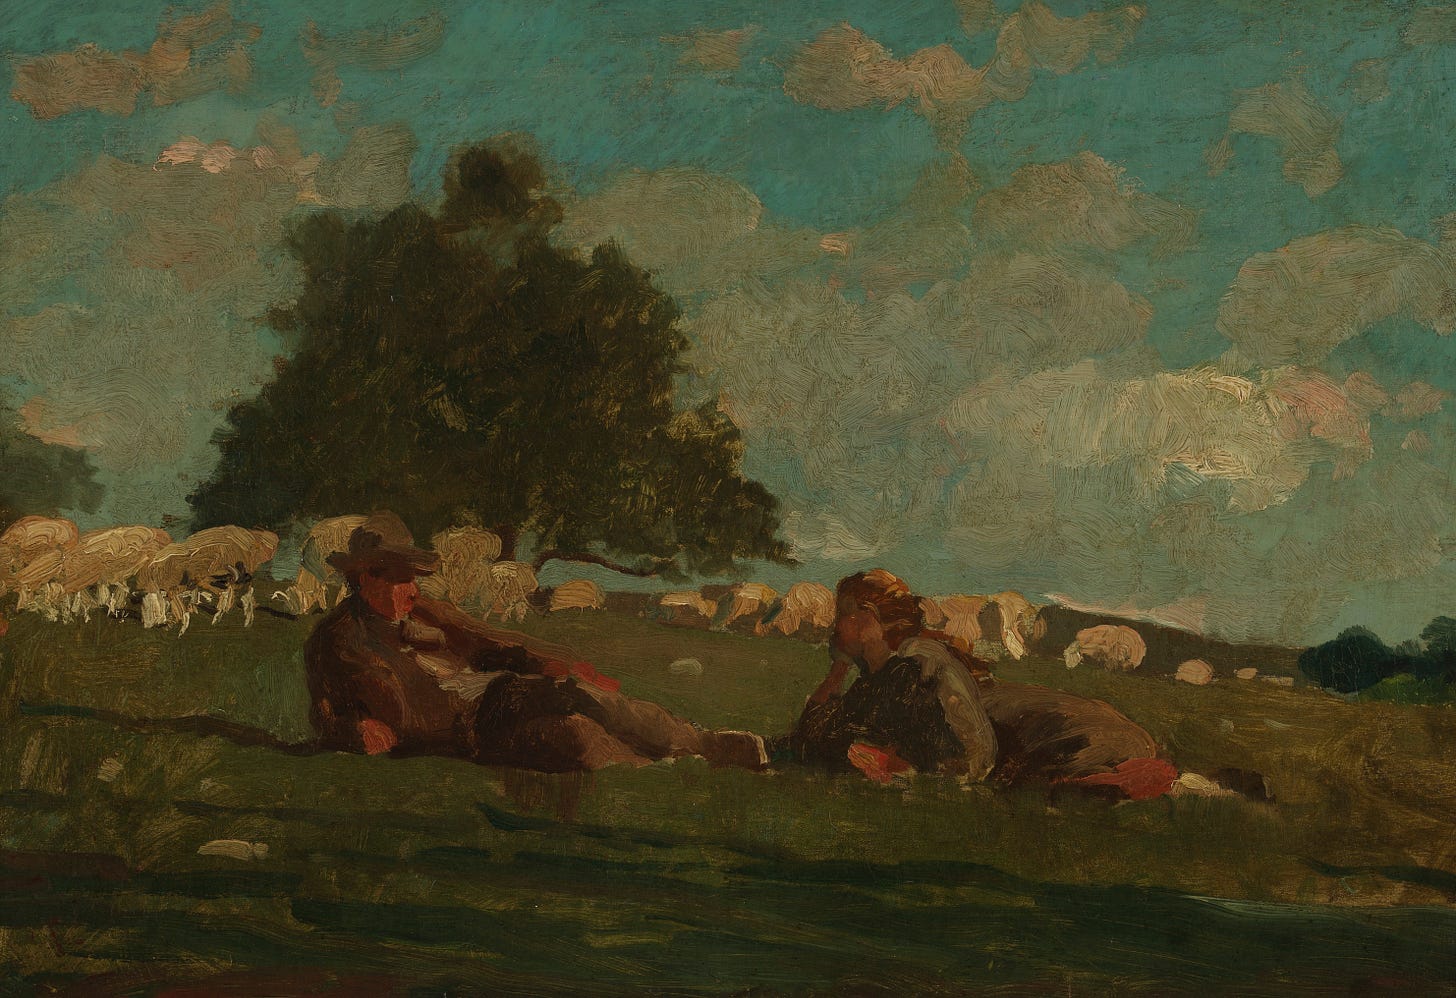 Boy and Girl in a Field with Sheep (1878)